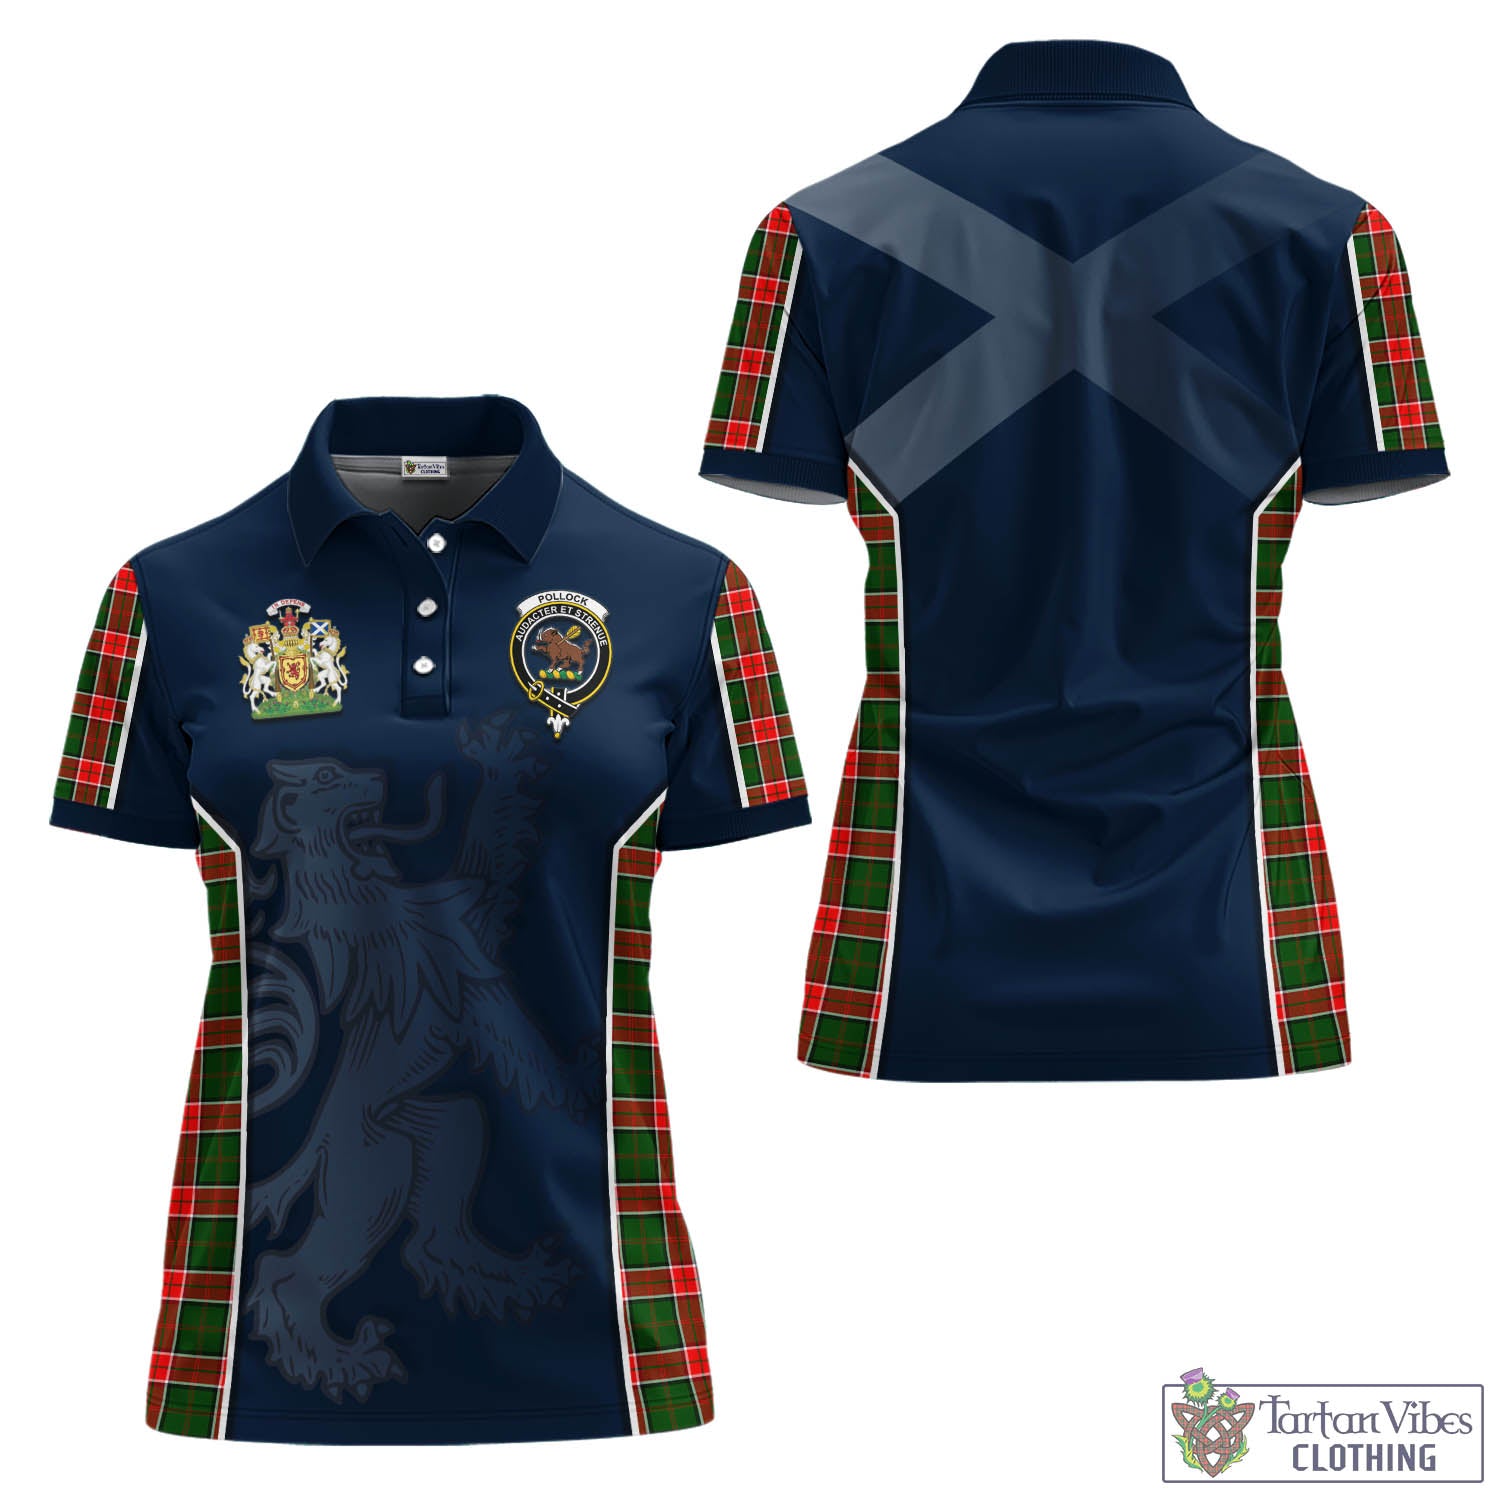 Tartan Vibes Clothing Pollock Modern Tartan Women's Polo Shirt with Family Crest and Lion Rampant Vibes Sport Style